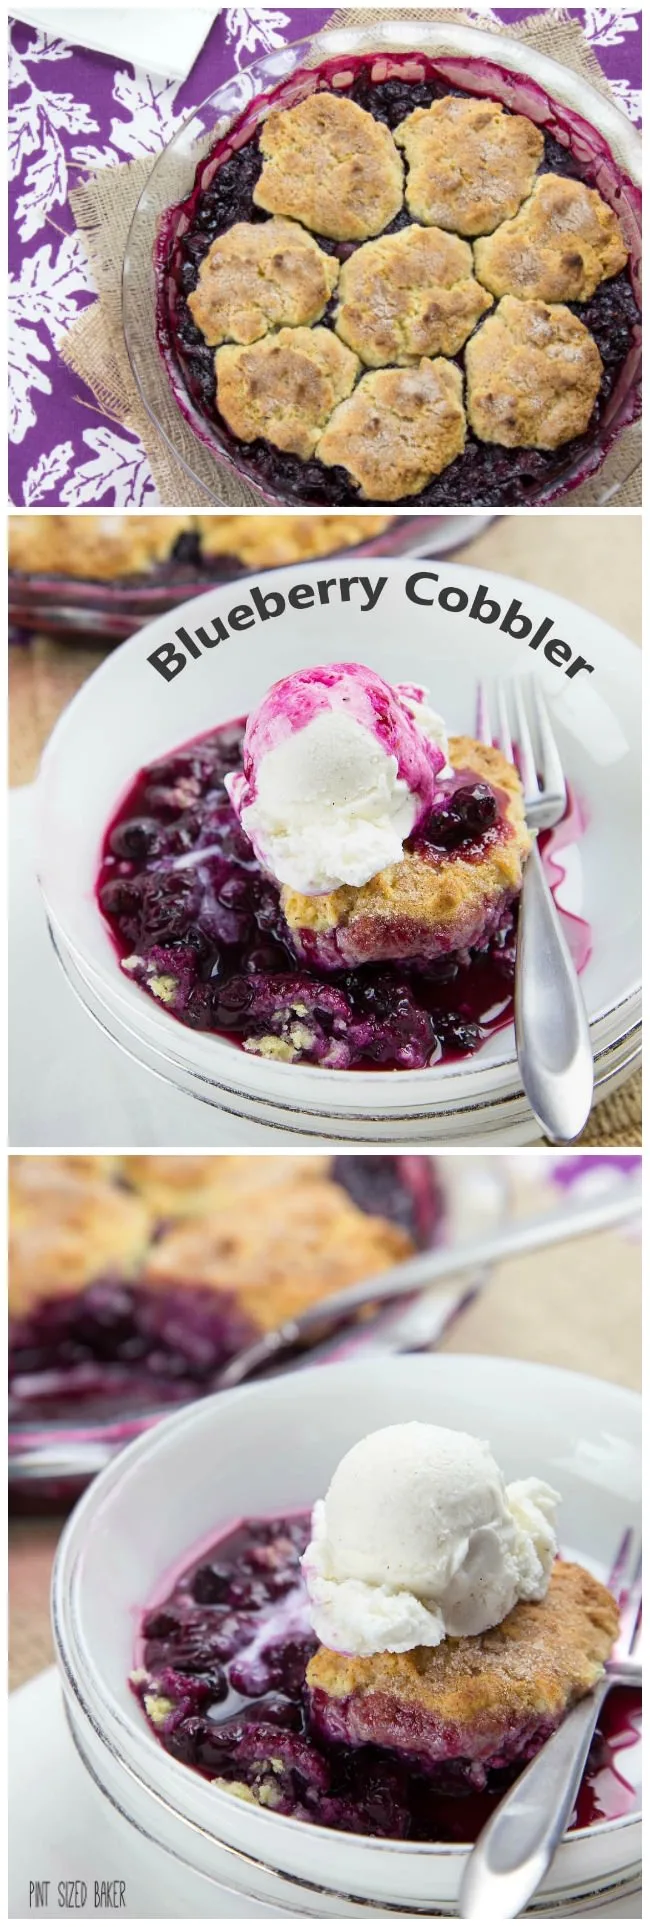 Easy and Delicious - this one pan blueberry cobbler will have you coming back for more!